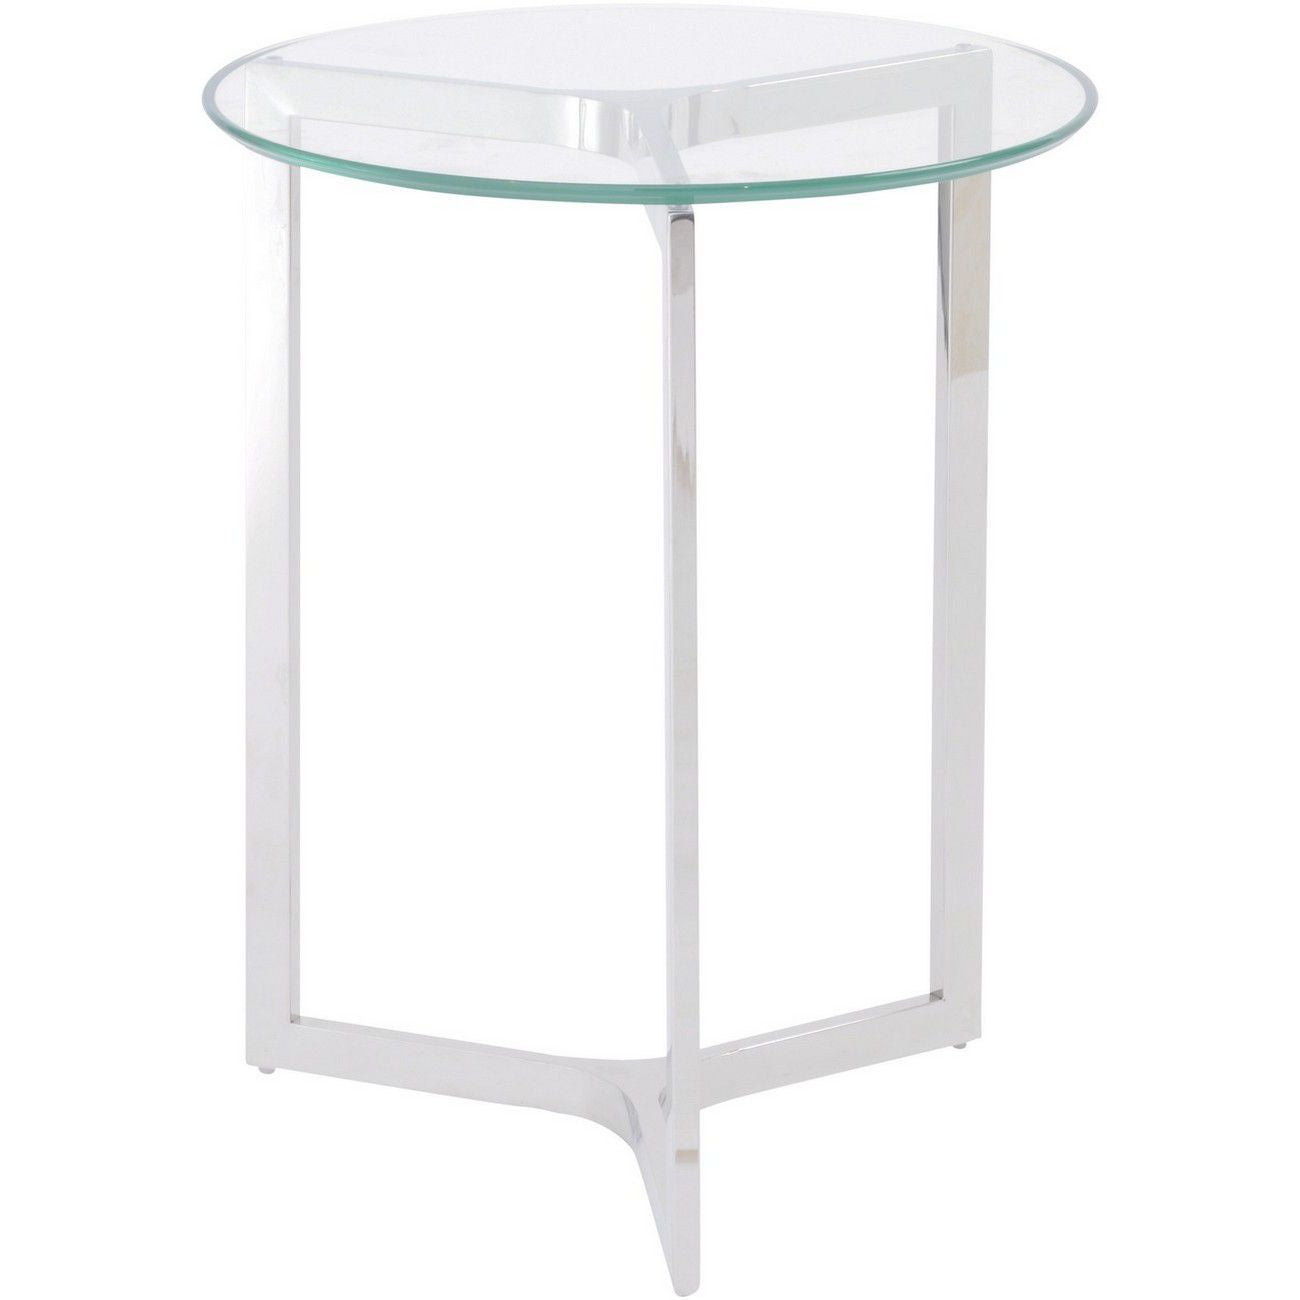 Argento Stainless Steel And Glass End Table - Pavilion Interiors